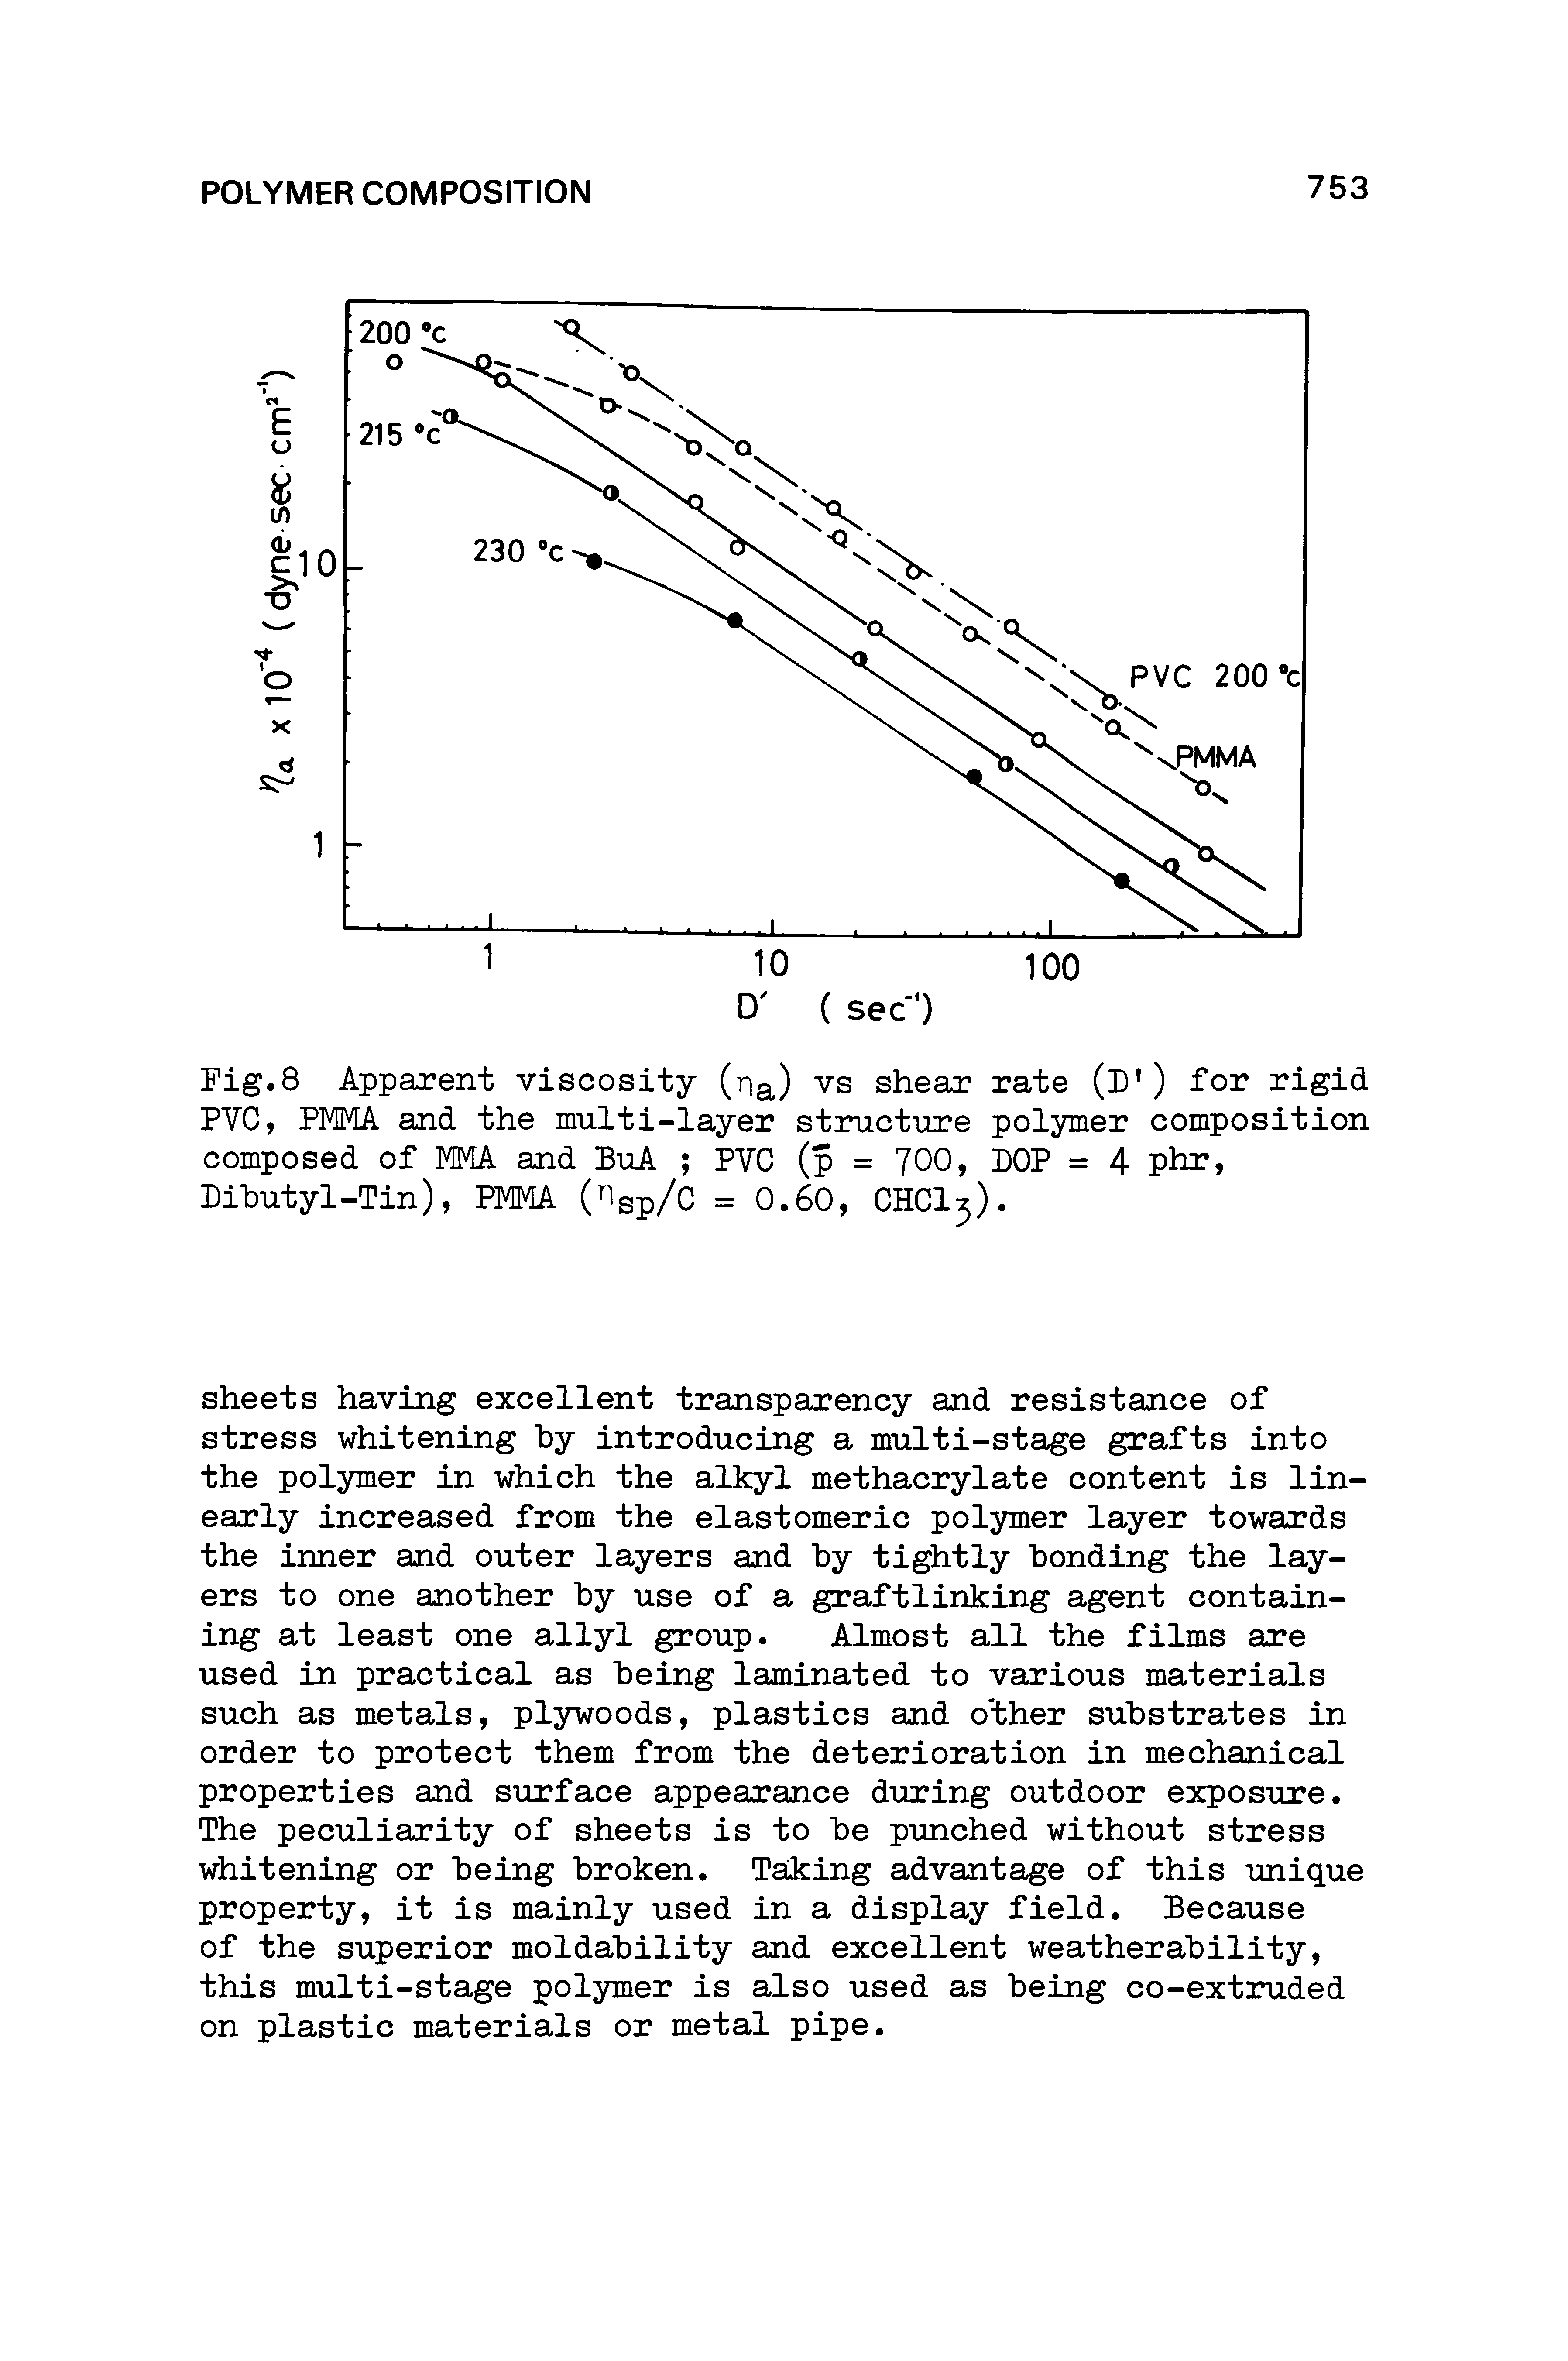 Fig.8 Apparent viscosity (pa) vs shear rate (D ) for rigid PVC, PiyiMA and the multi-layer structure polymer composition composed of MMA and BuA PVC (p = 700, DOP = 4 Bibutyl-Tin), PIVIMA ( Isp/C = 0.60, CHCI5).